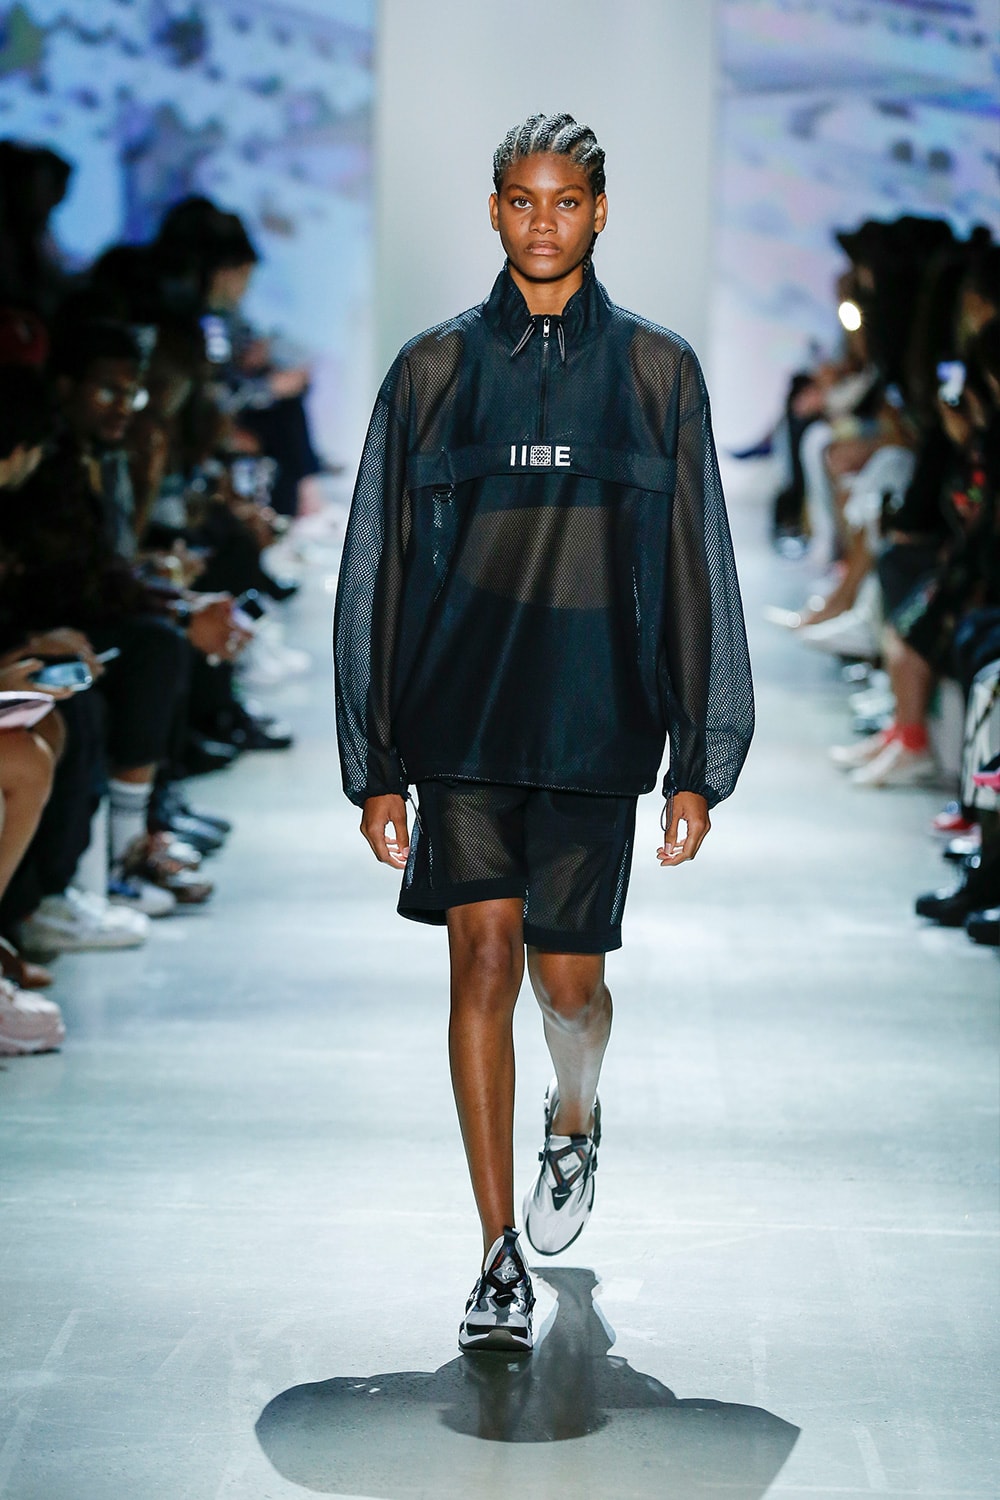 IISE Spring/Summer 2020 Runway Collection NYFW New York Fashion Week brand streetwear contemporary menswear unisex cctv prints street fashion chaebol conglomerate concept korea terrence kevin kim